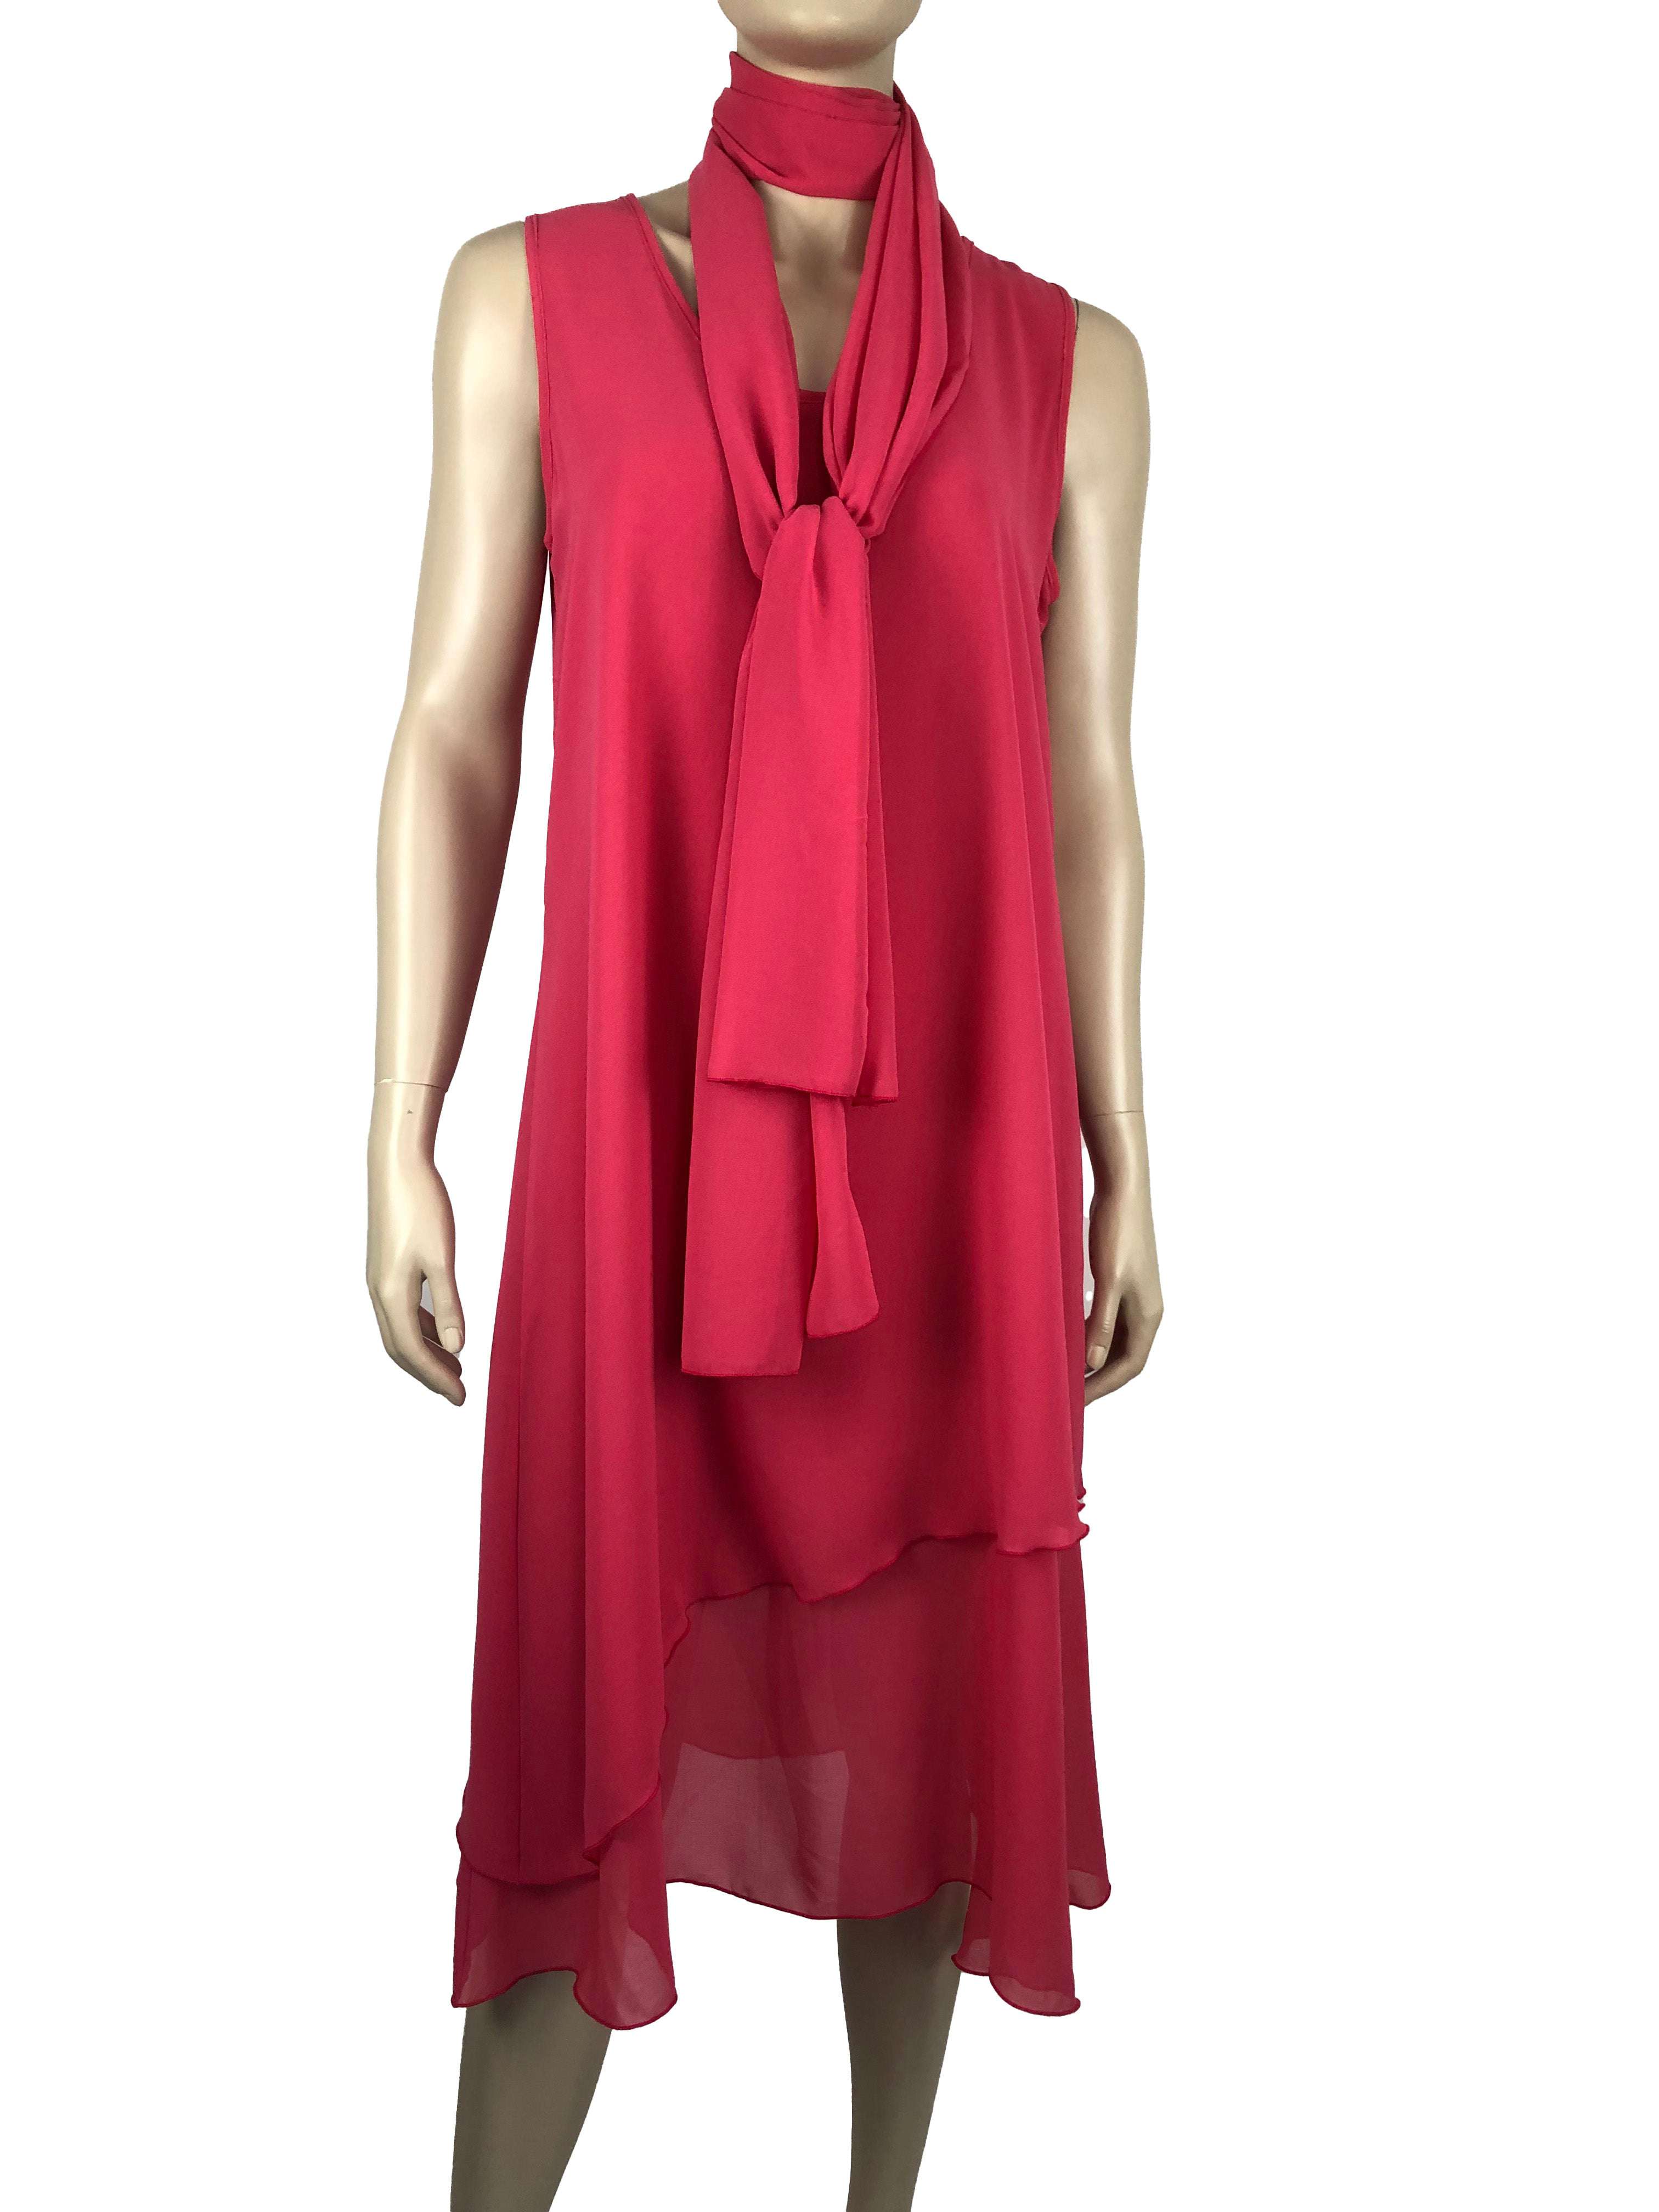 Women's Dress Special Occasion Coral Layered Chiffon Dress Includes Shawl Flattering Fit Quality Made in Canada Yvonne Marie Boutiques - Yvonne Marie - Yvonne Marie